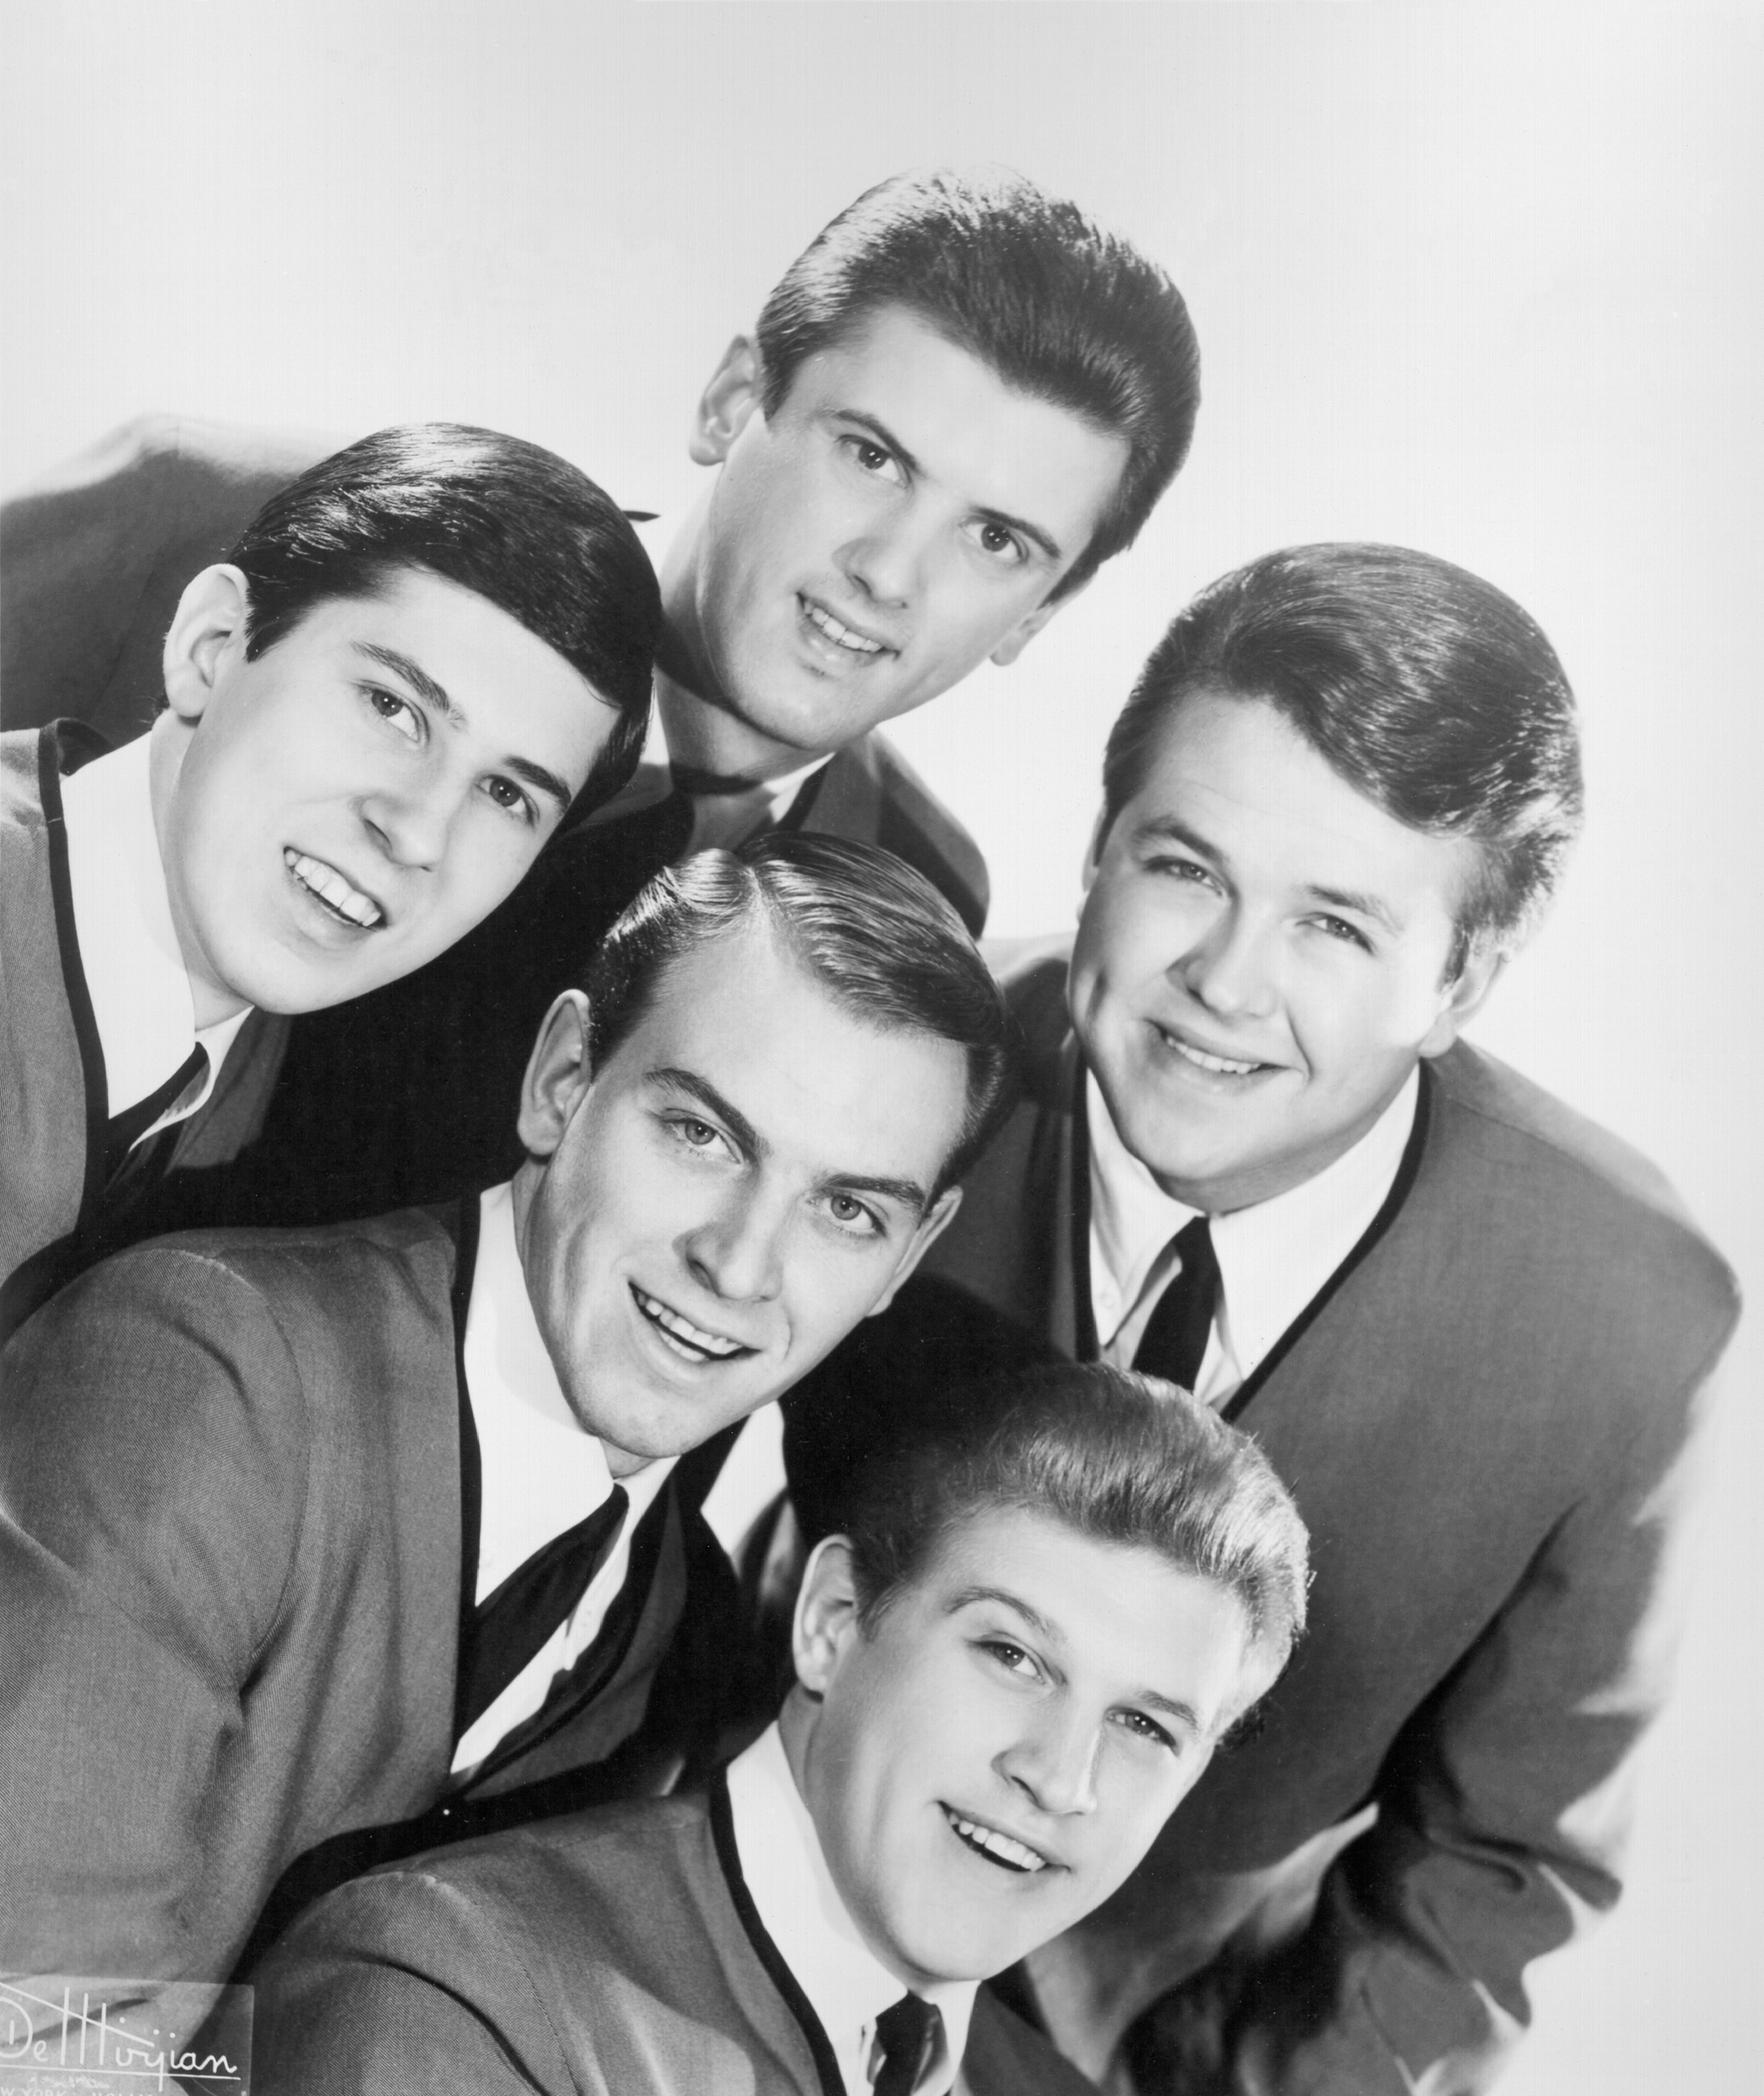 Dick Peterson, Mike Mitchell, Norm Sundholm, Lynn Easton and Barry Curtis of the rock and roll group "The Kingsmen" pose for a portrait in circa 1964.